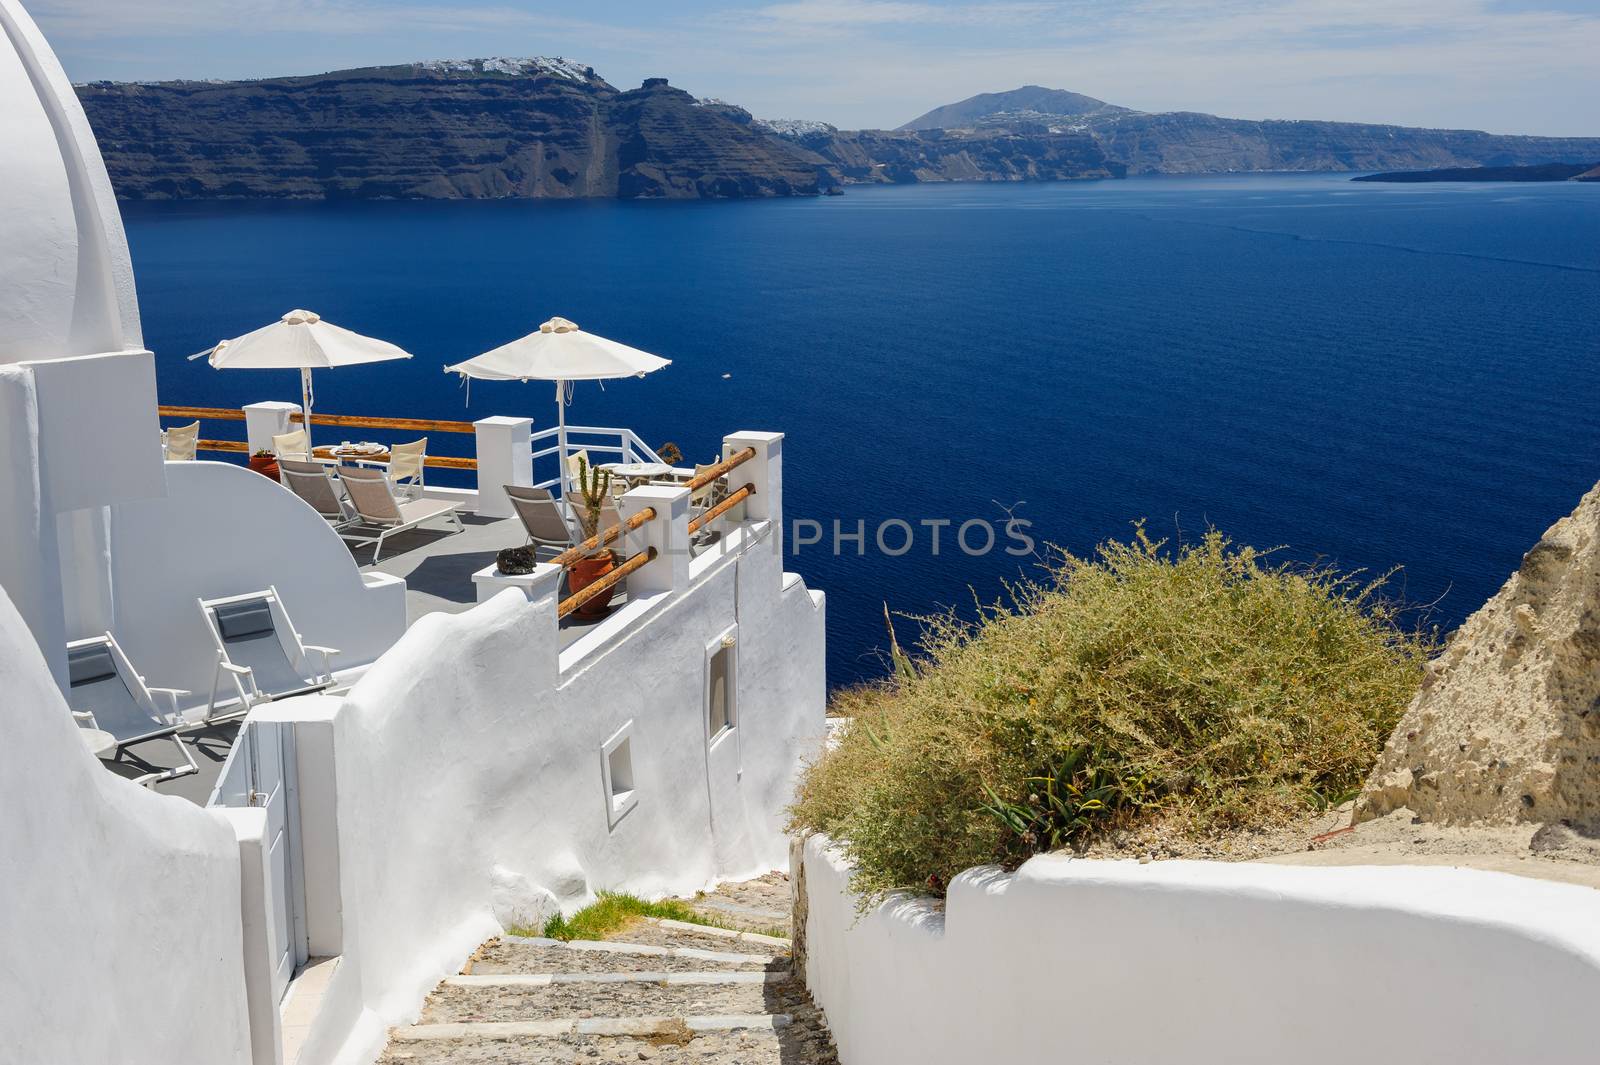 View of Oia, Santorini by starush